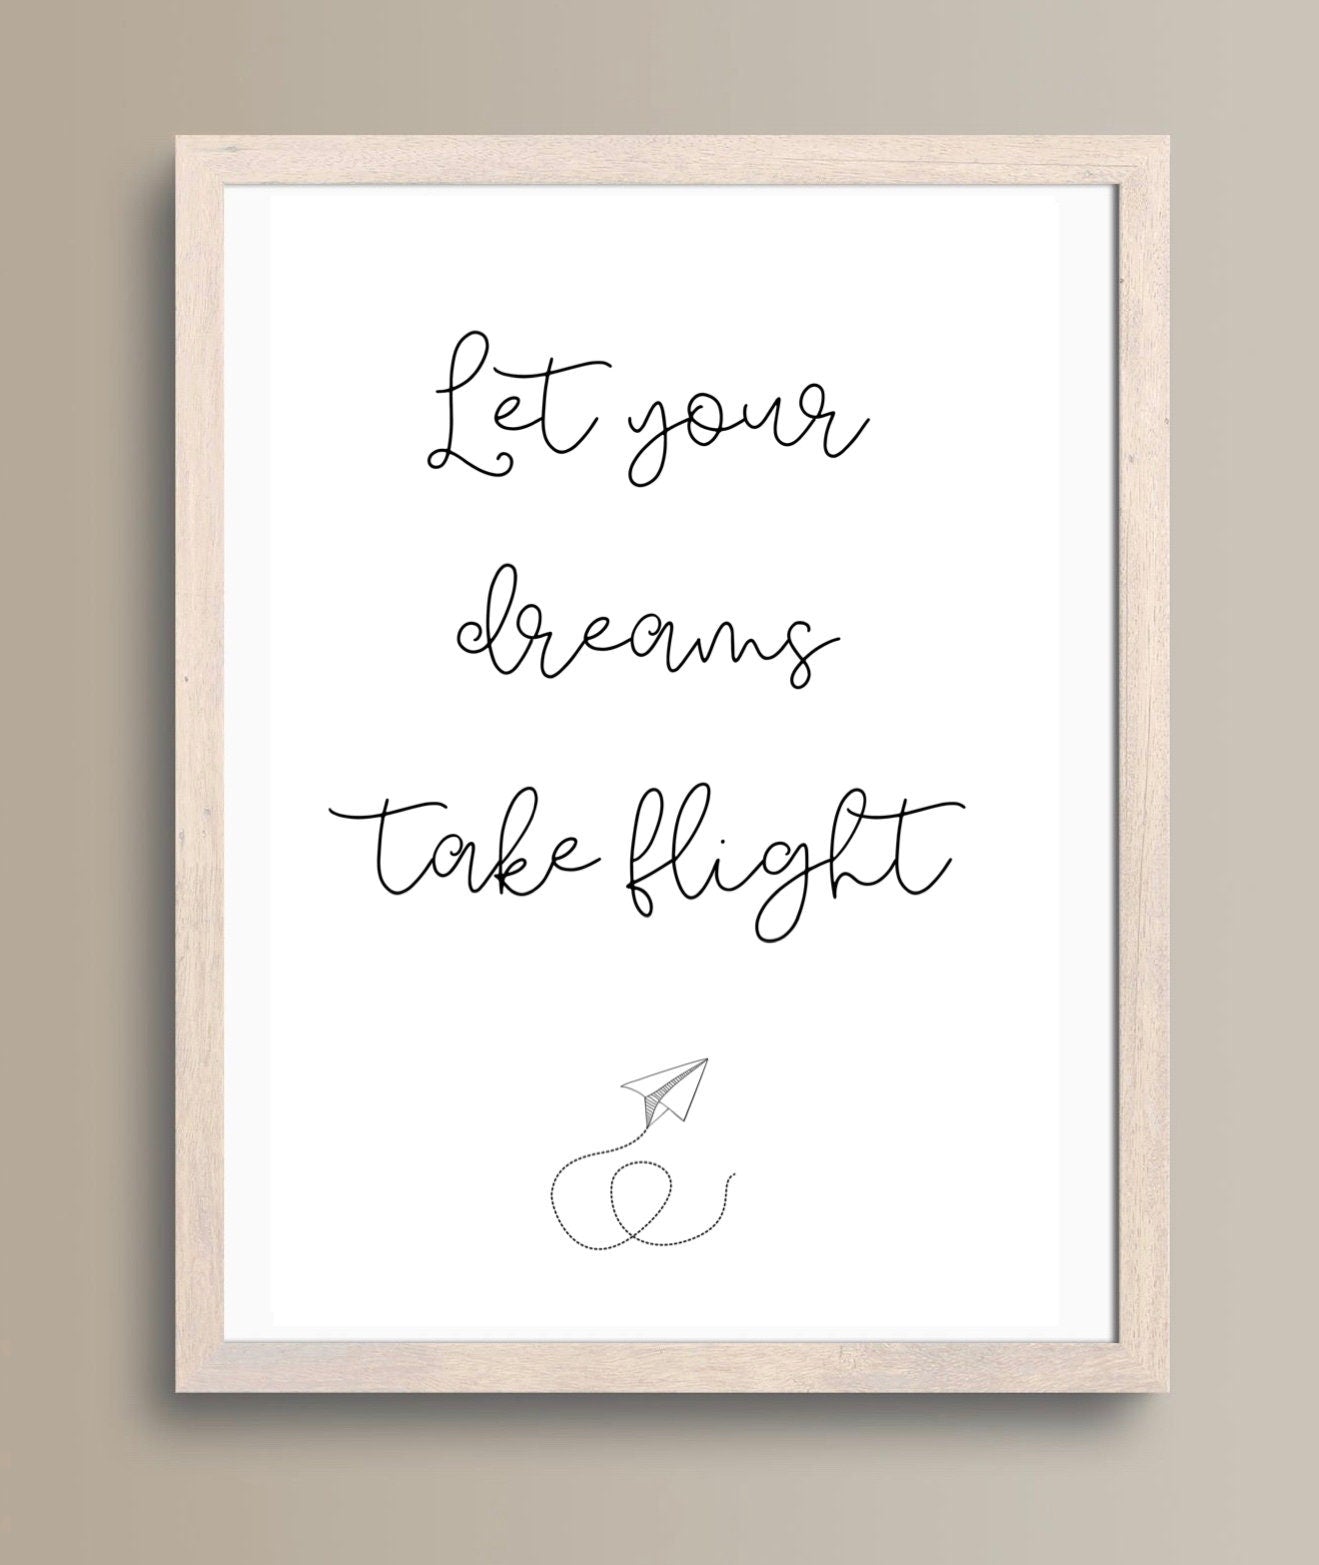 Travel Quote Print: ‘Let Your Dreams Take Flight’ Travel Poster/ Cabin Crew Poster/ Flight Attendant Poster